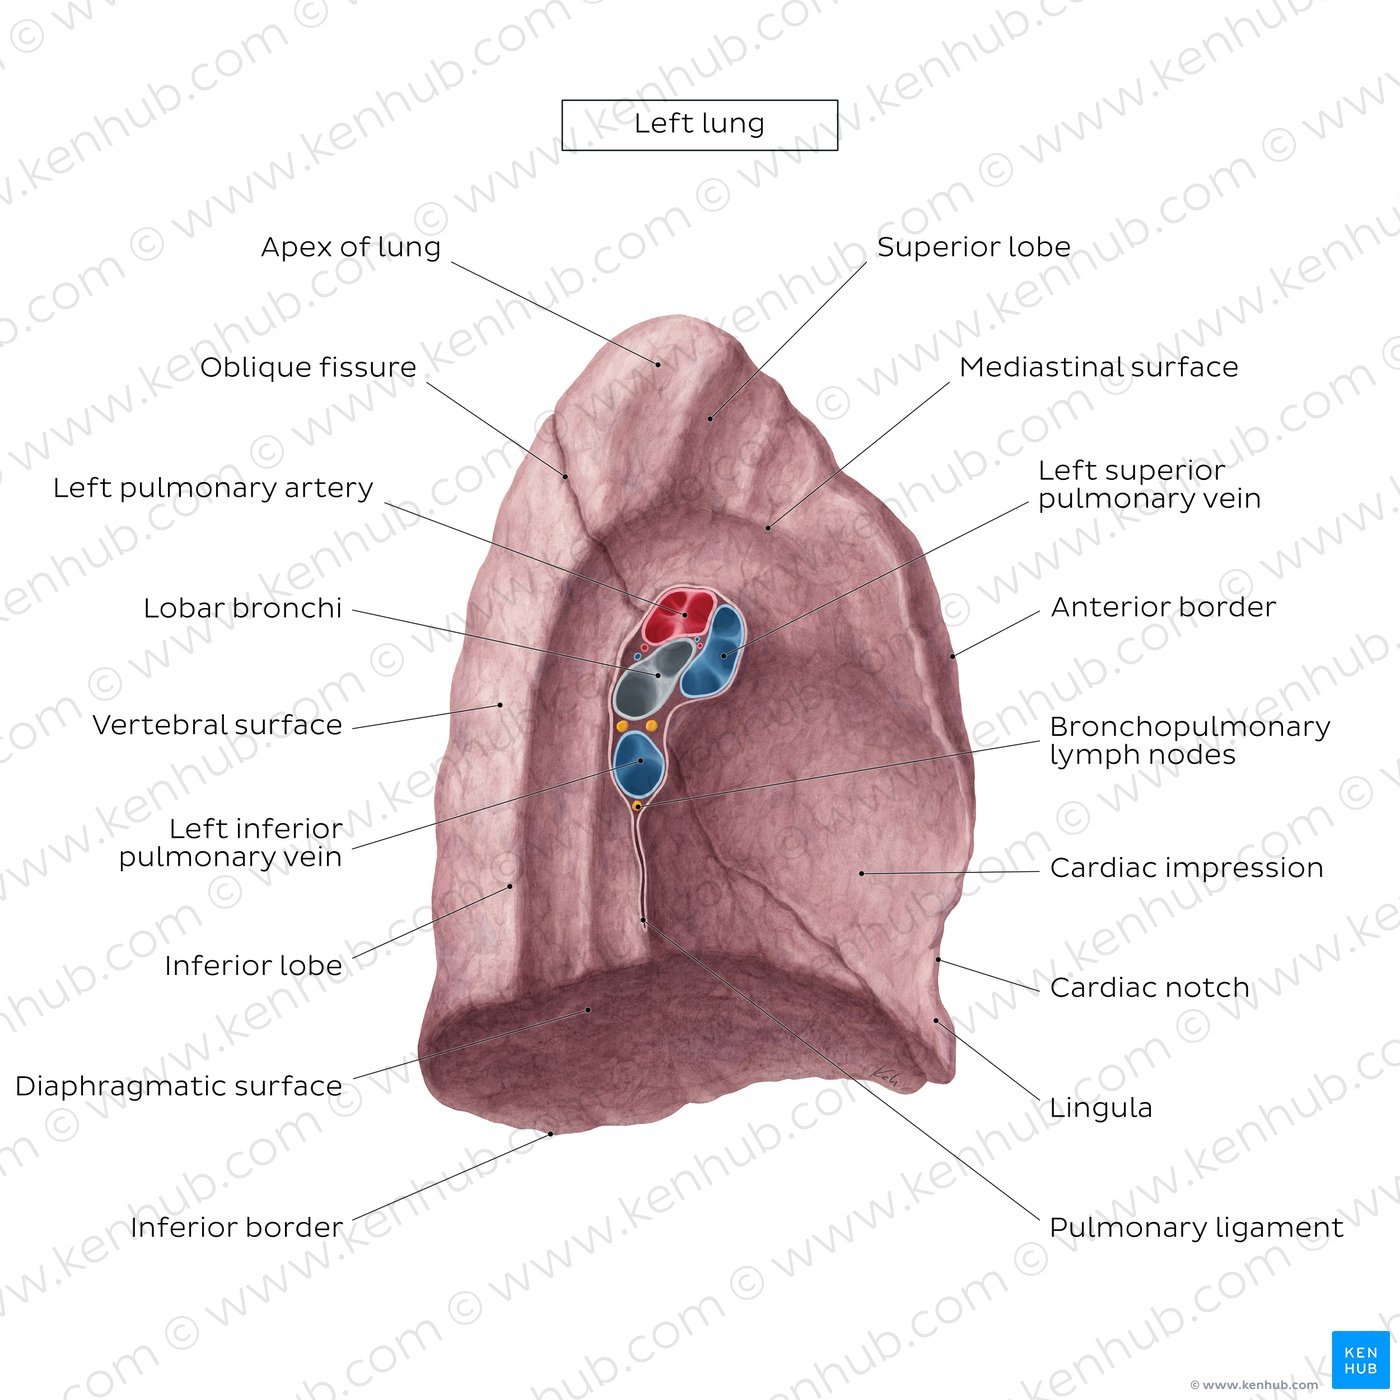 Overview of the medial surface of the left lung